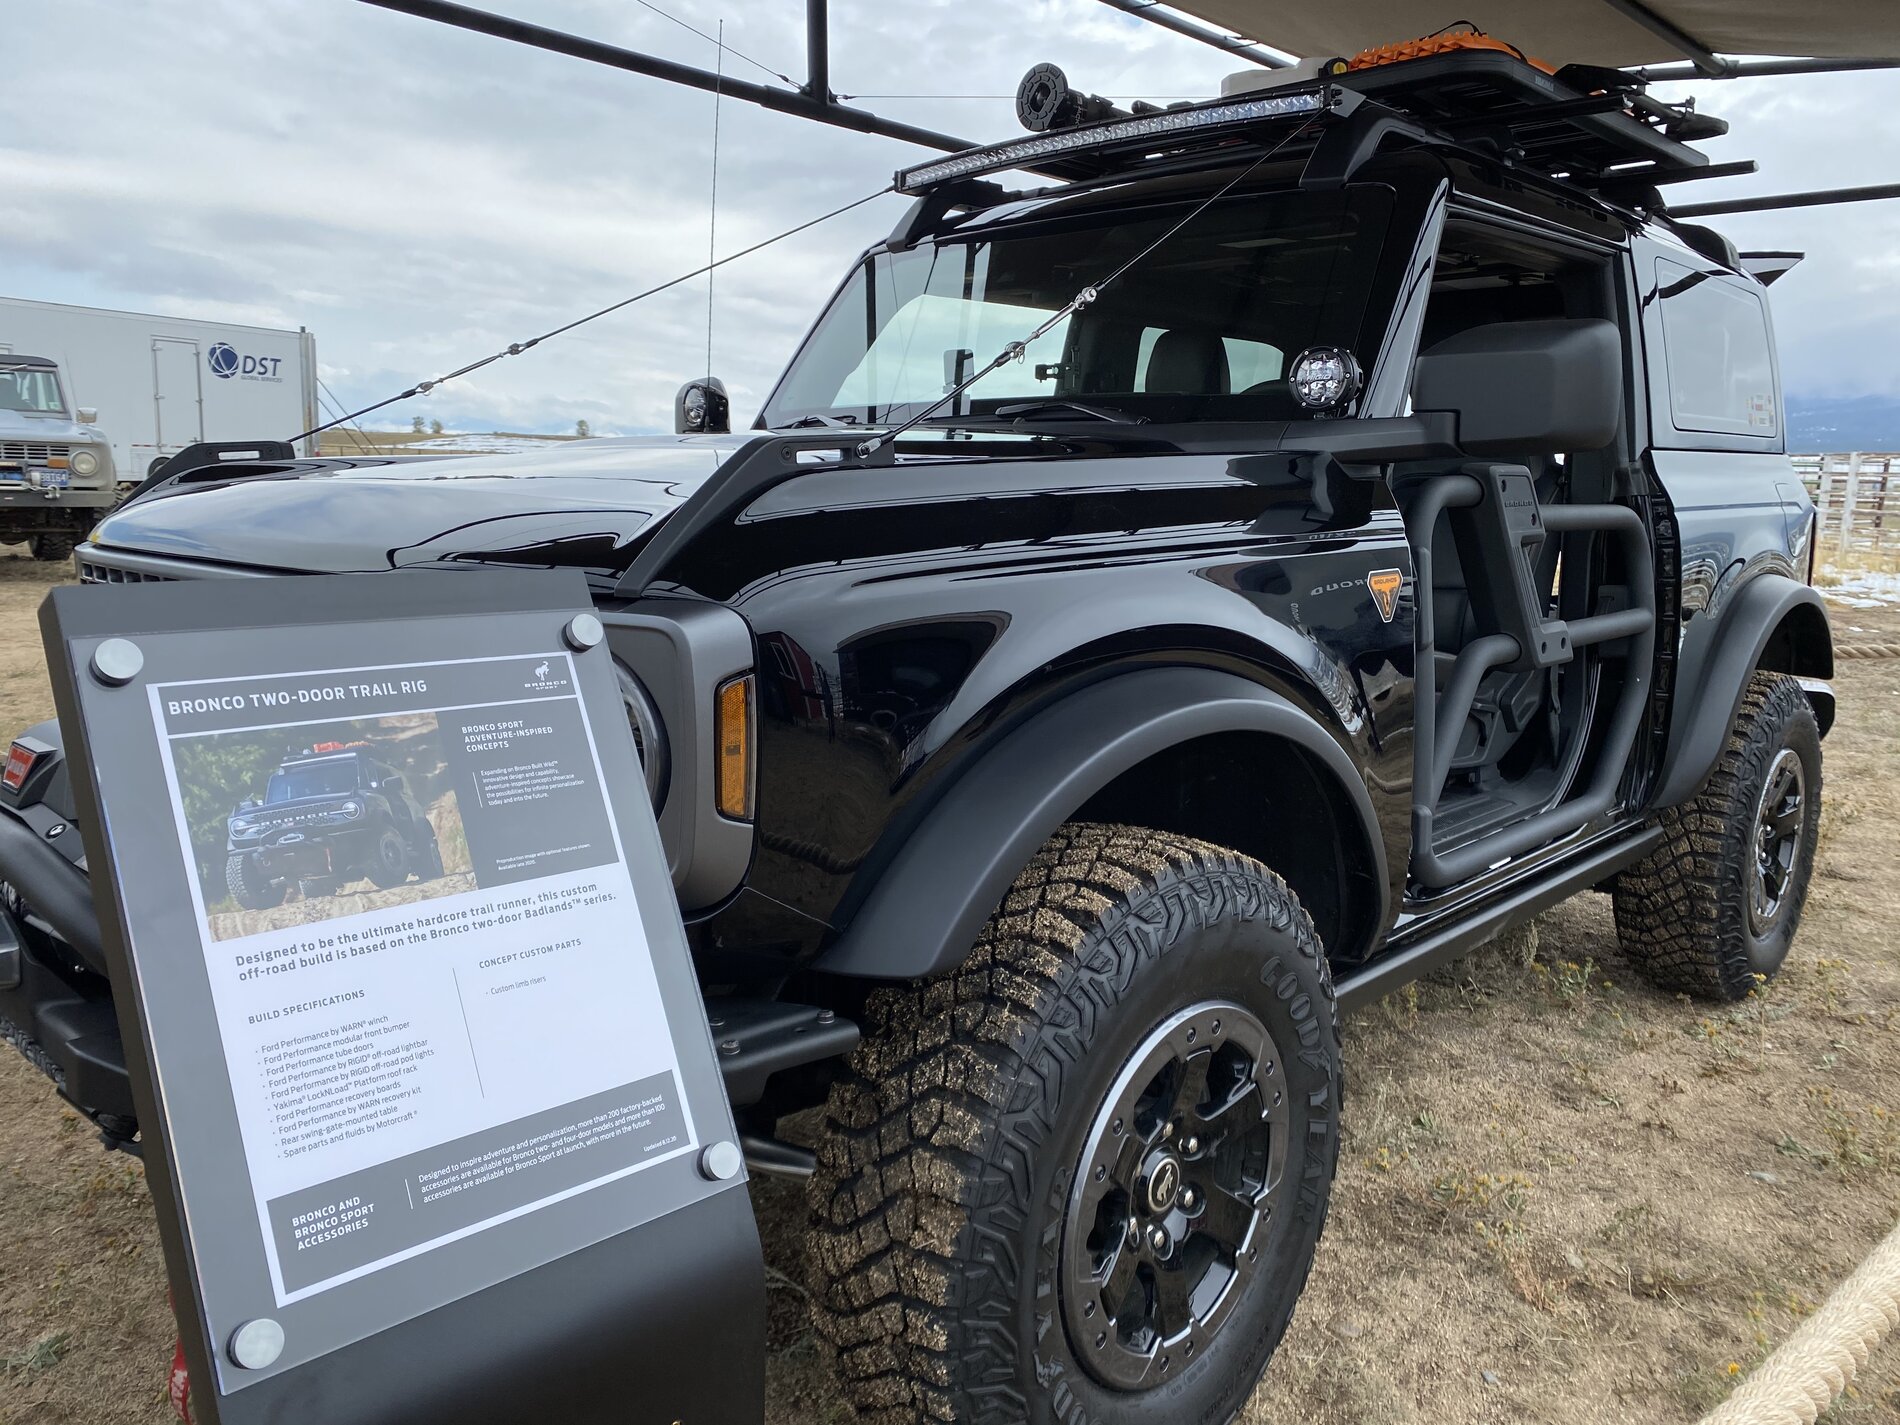 Ford Bronco 2021 Bronco's 1st public appearance comes 9/9-12 at Bronco Super Celebration West in Colorado [2-Door and Sport will be displayed] AF50E3AF-5F8E-43D0-81E6-9AD70E8E1028